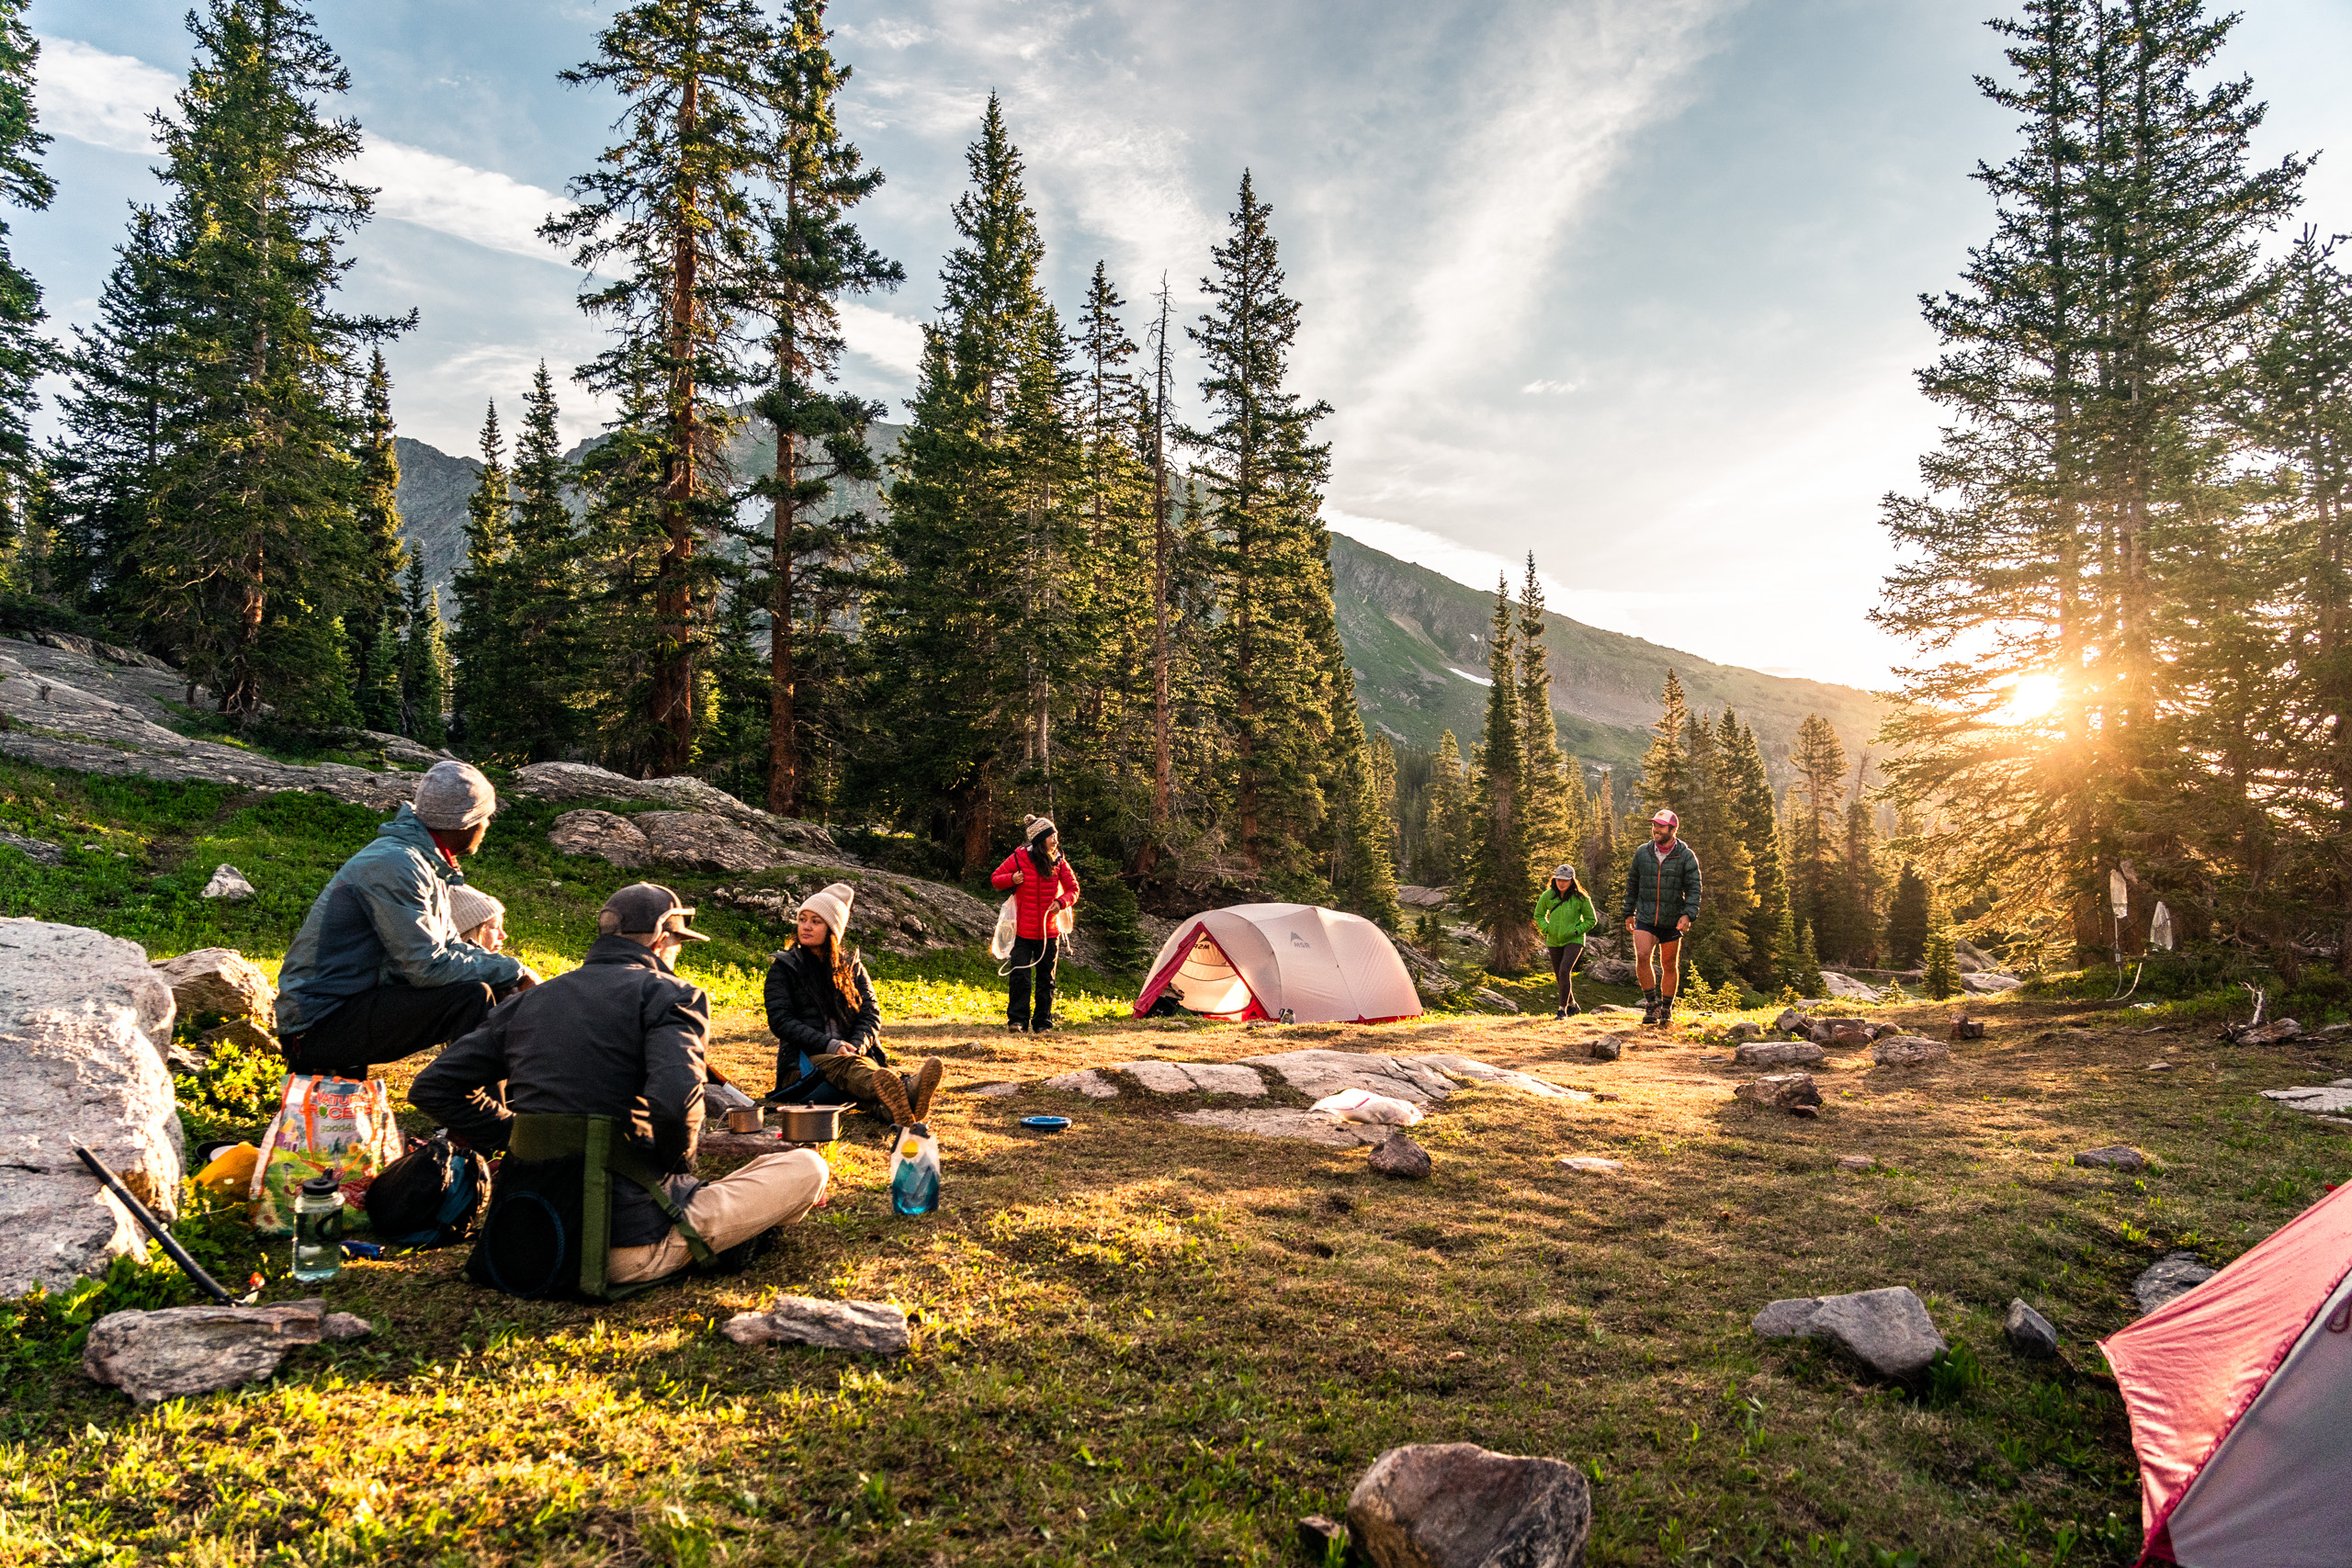 A group of people hang out early morning in the backcountry camp in the Colorado Rockies.